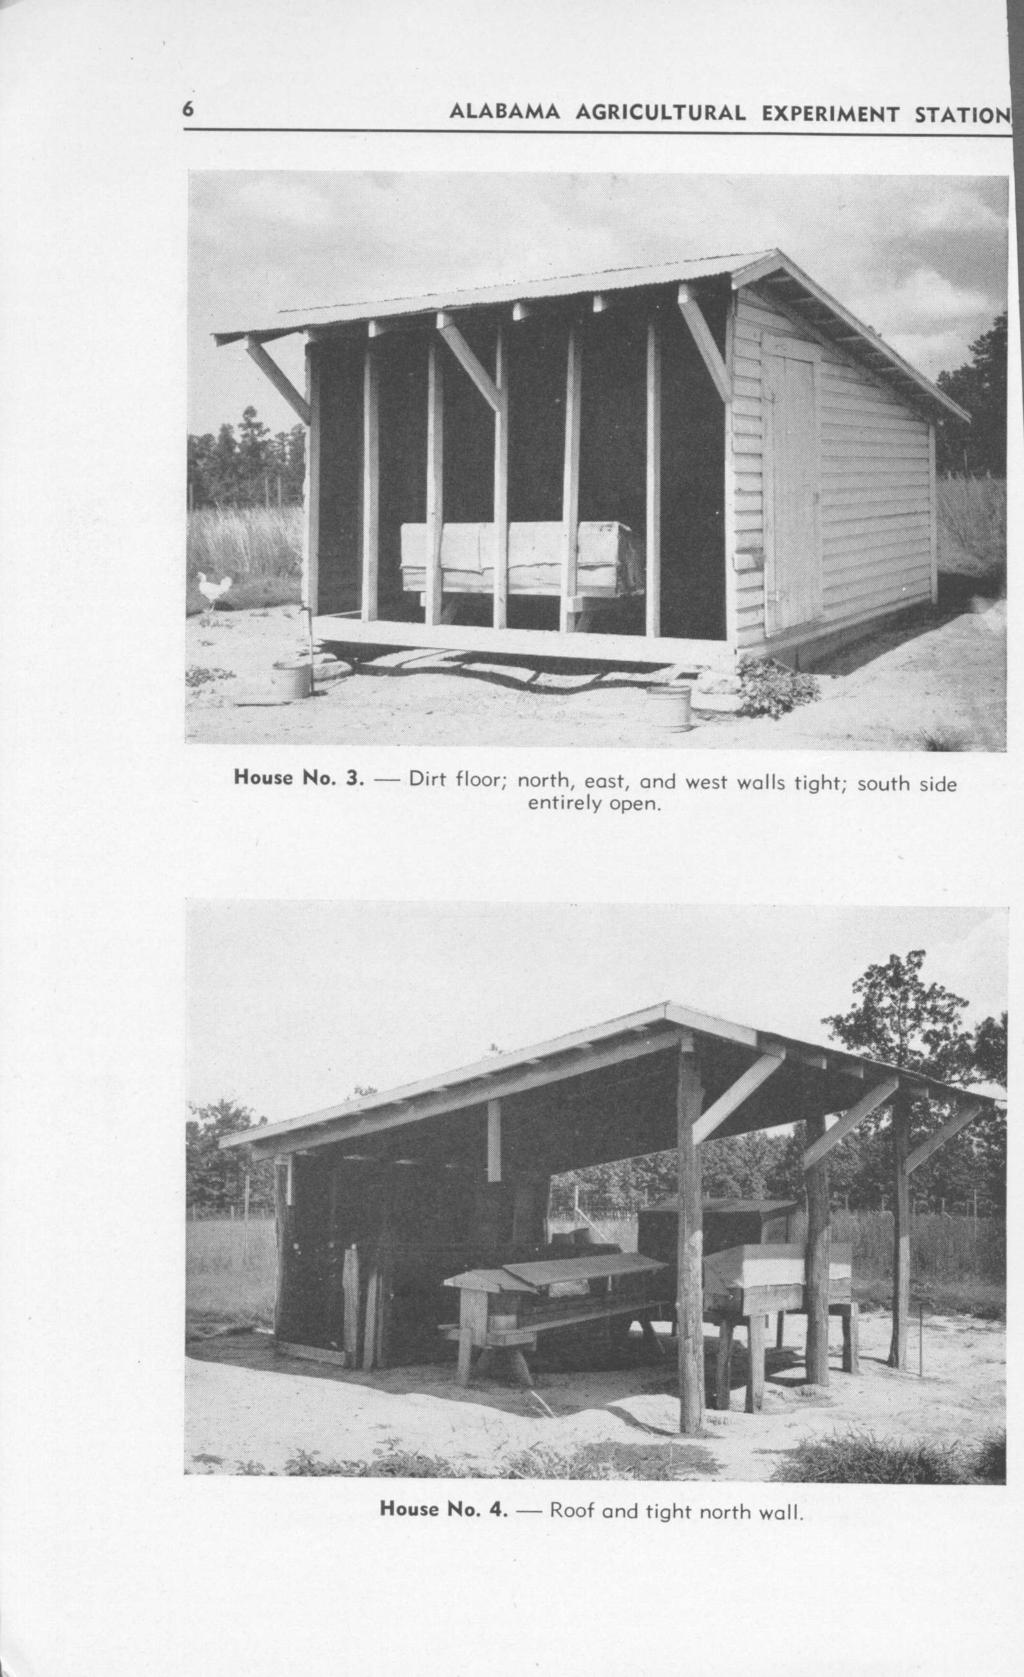 6 ALABAMA AGRICULTURAL EXPERIMENT STATION House No. 3.